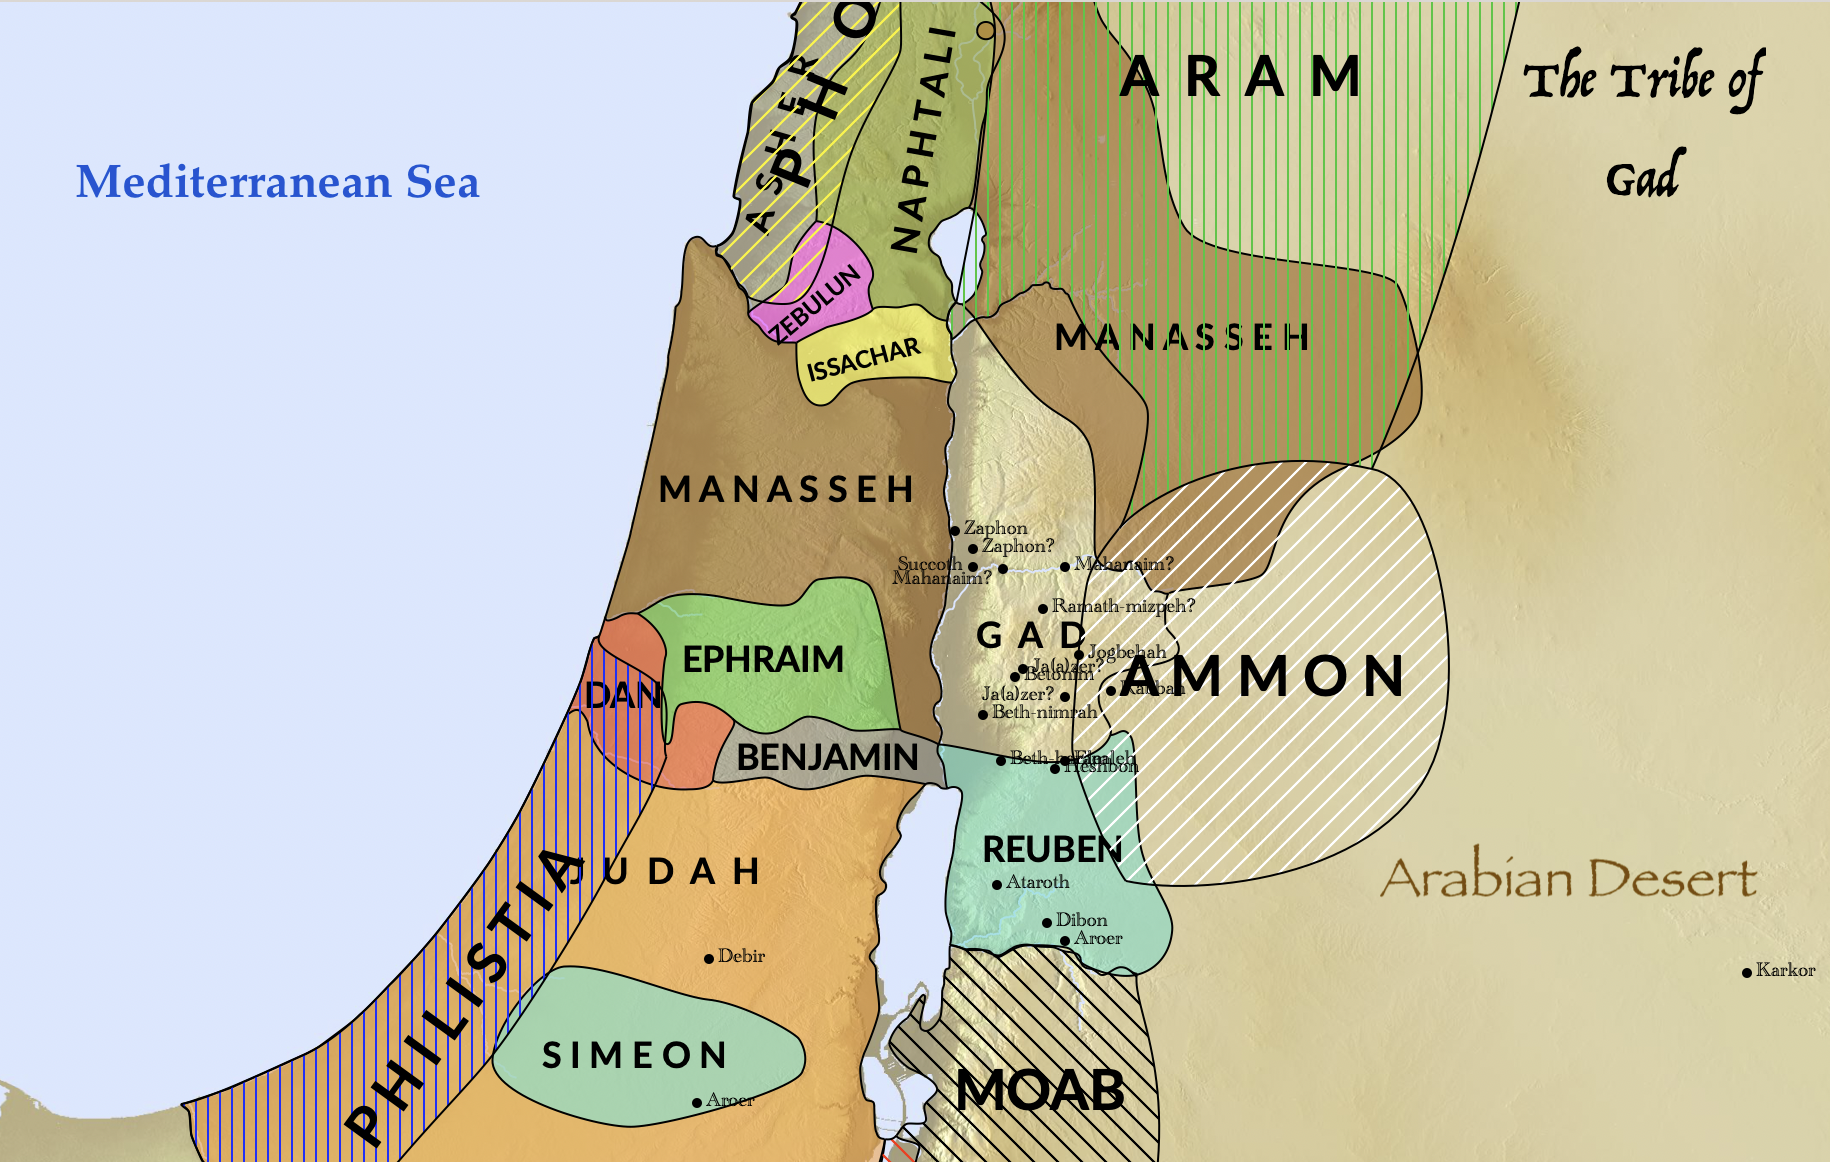 A map of the tribe of Gad and its neighbors.